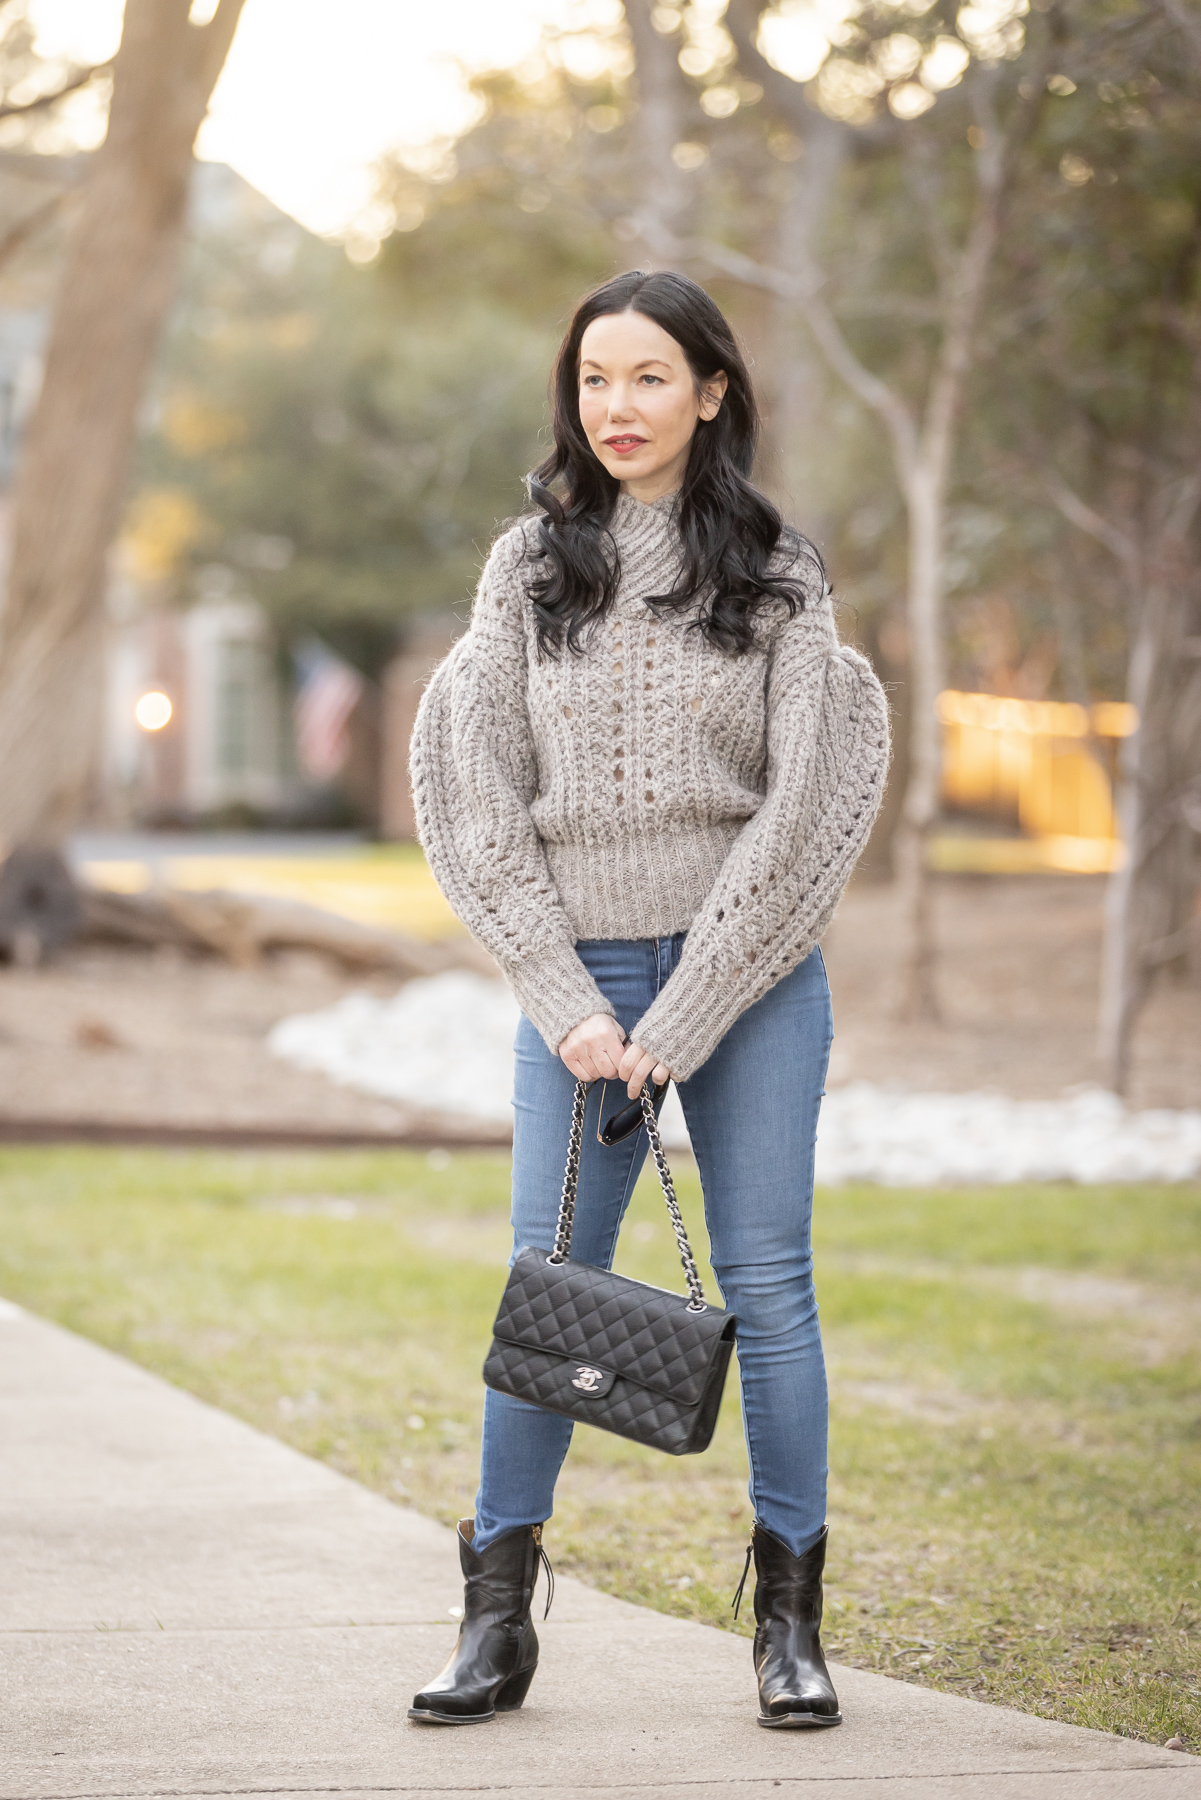 r13 Cowboy Boots styled by top Dallas fashion blogger, Pretty Little Shoppers